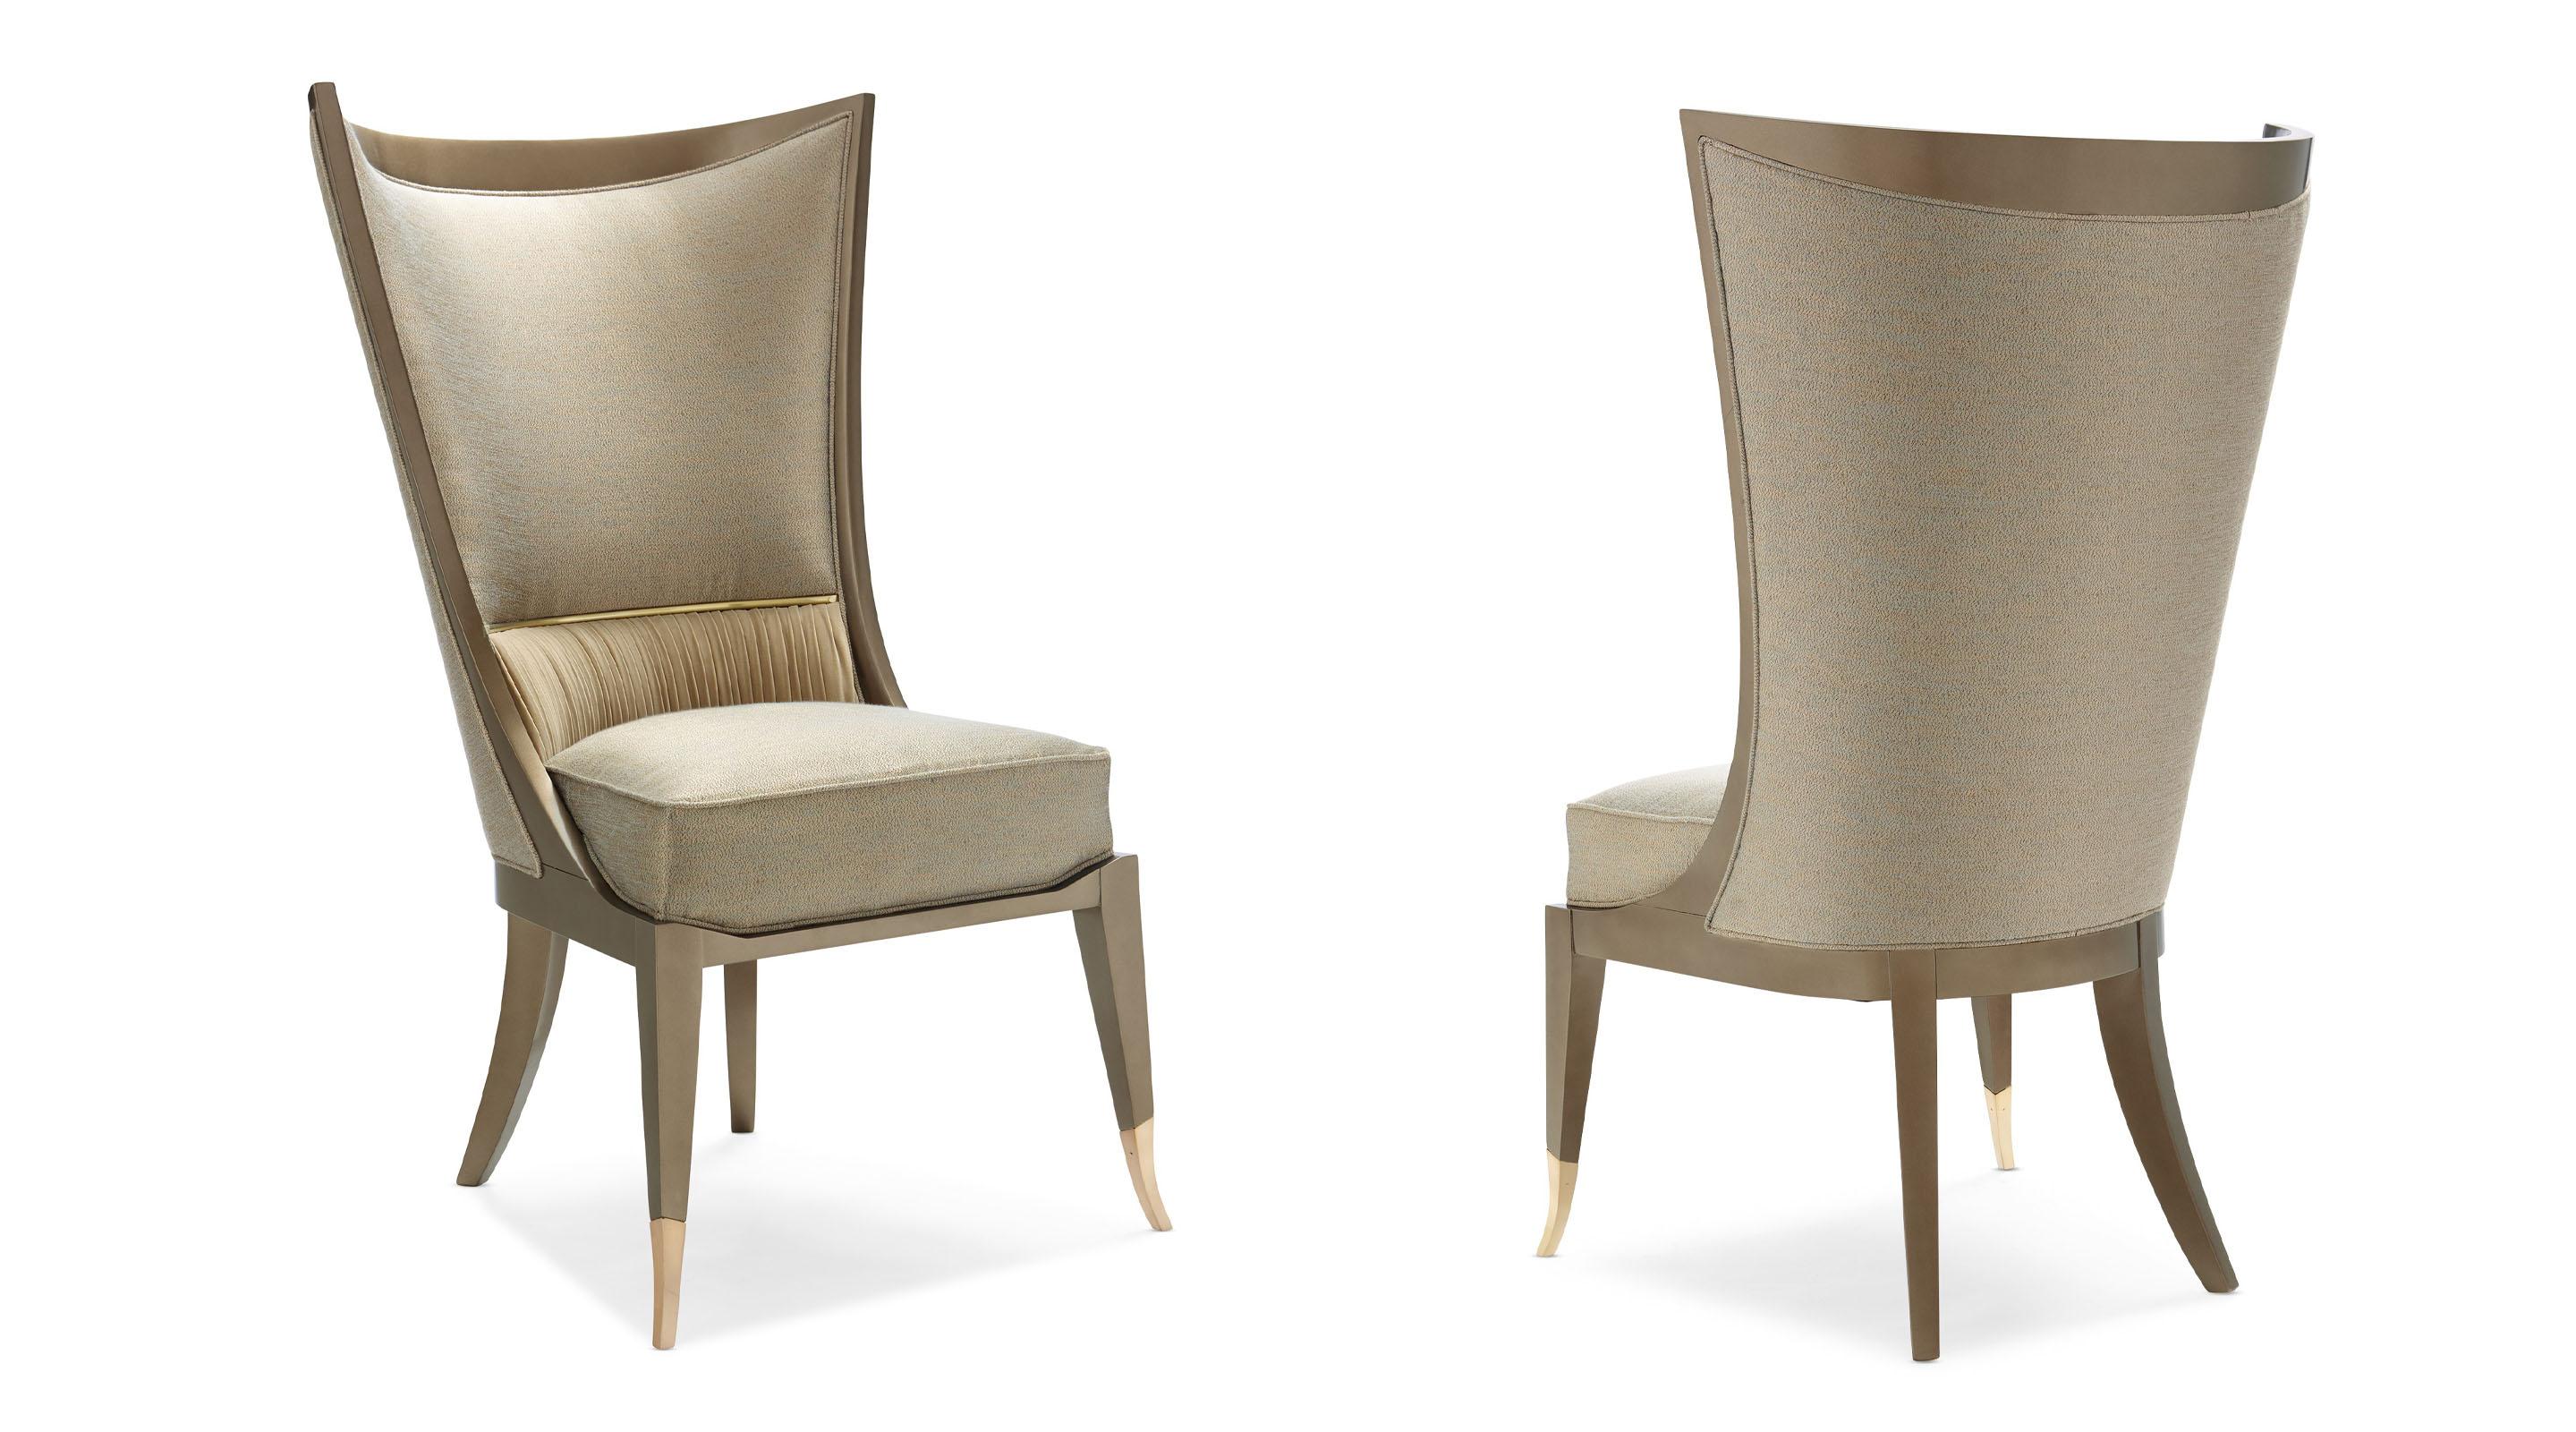 Contemporary Dining Chair Set COLLAR UP CLA-018-282-Set-2 in Golden Beige Fabric